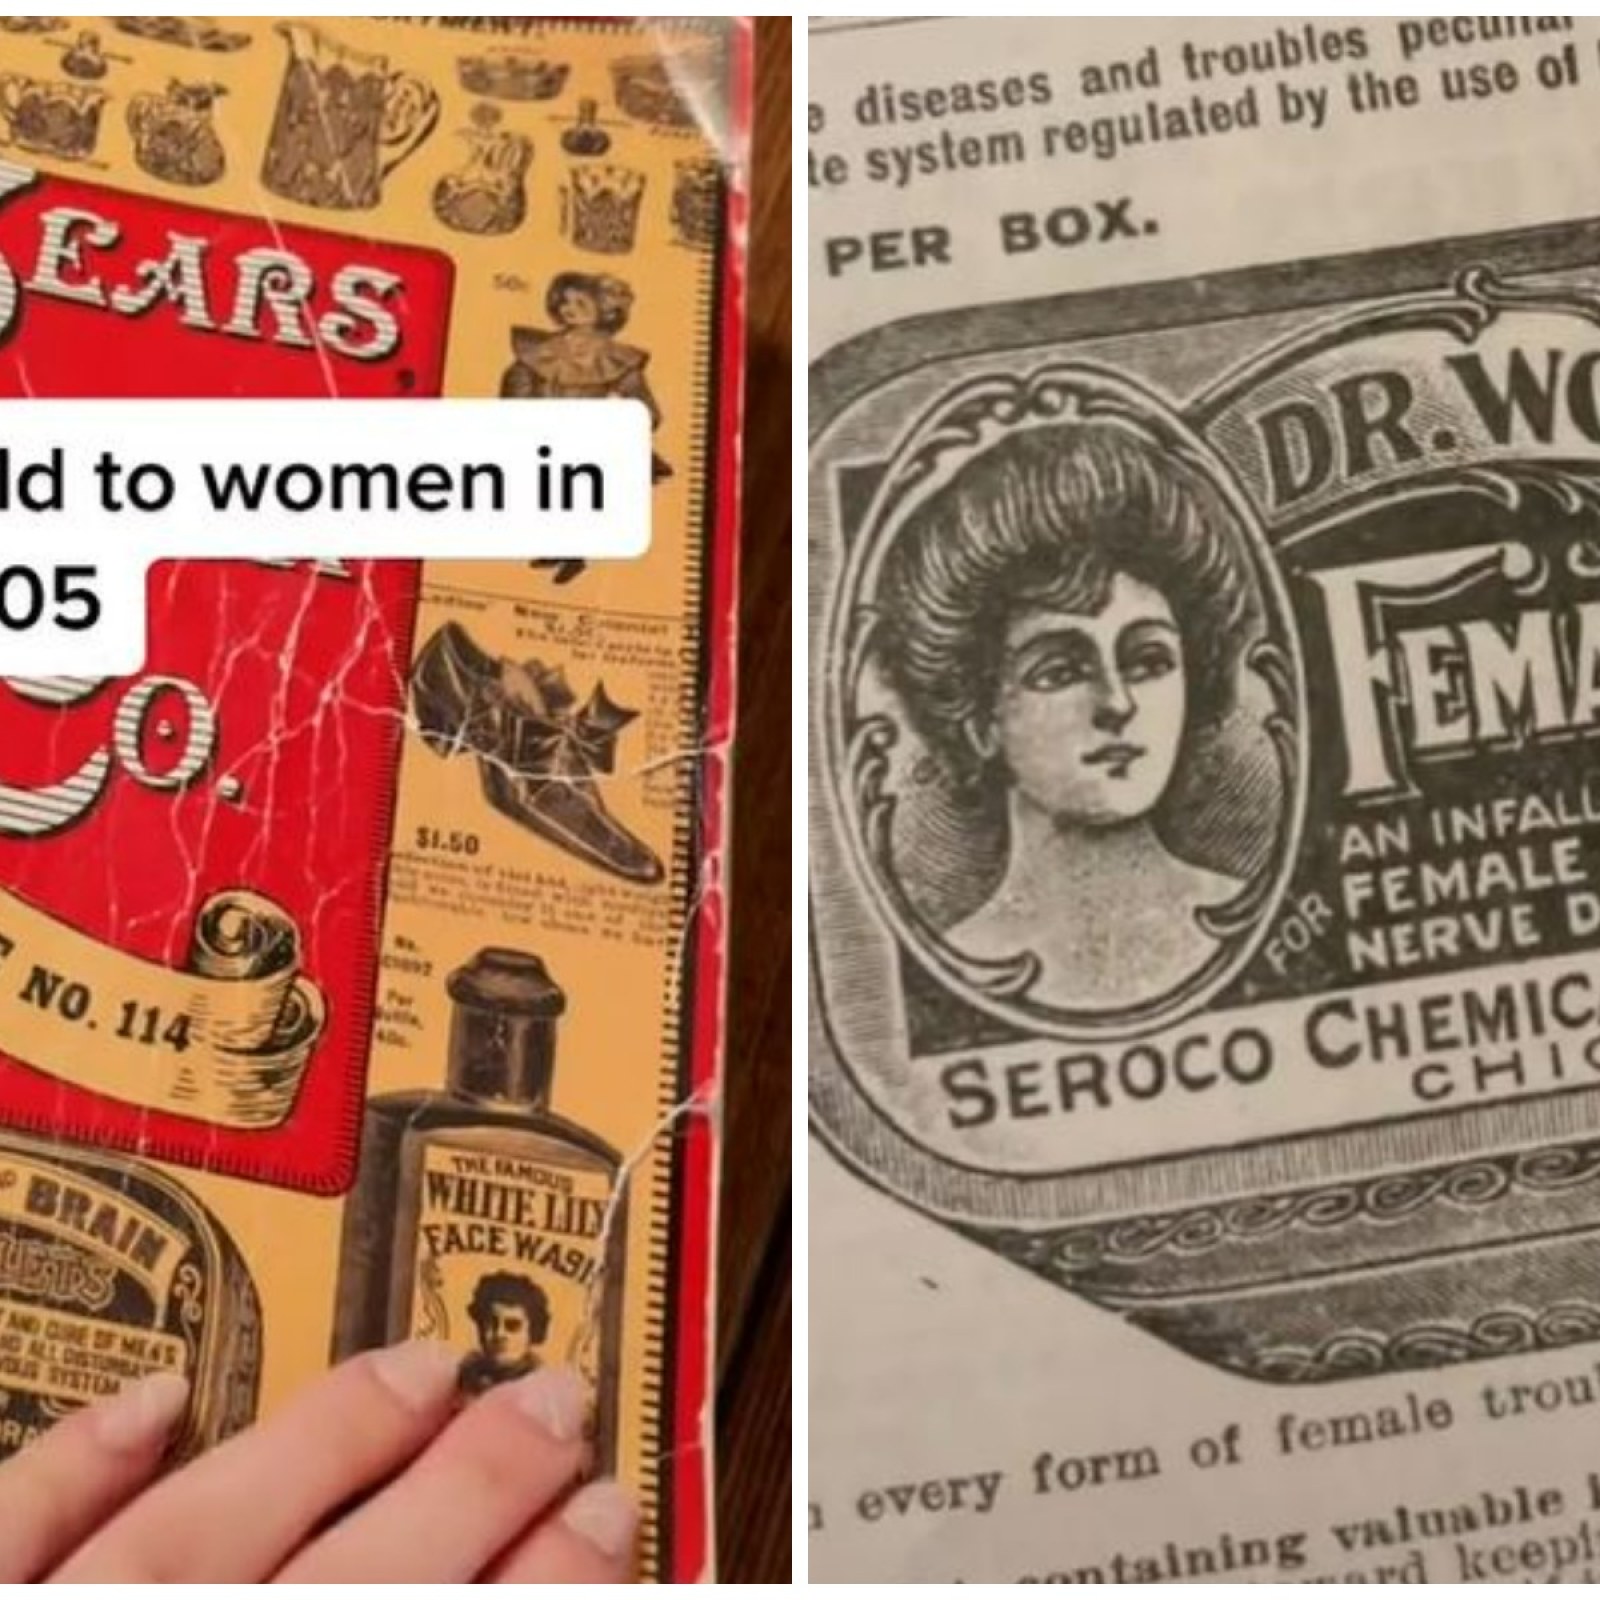 Unearthed Sears Catalog From 1905 Reveals Arsenous Tablets and